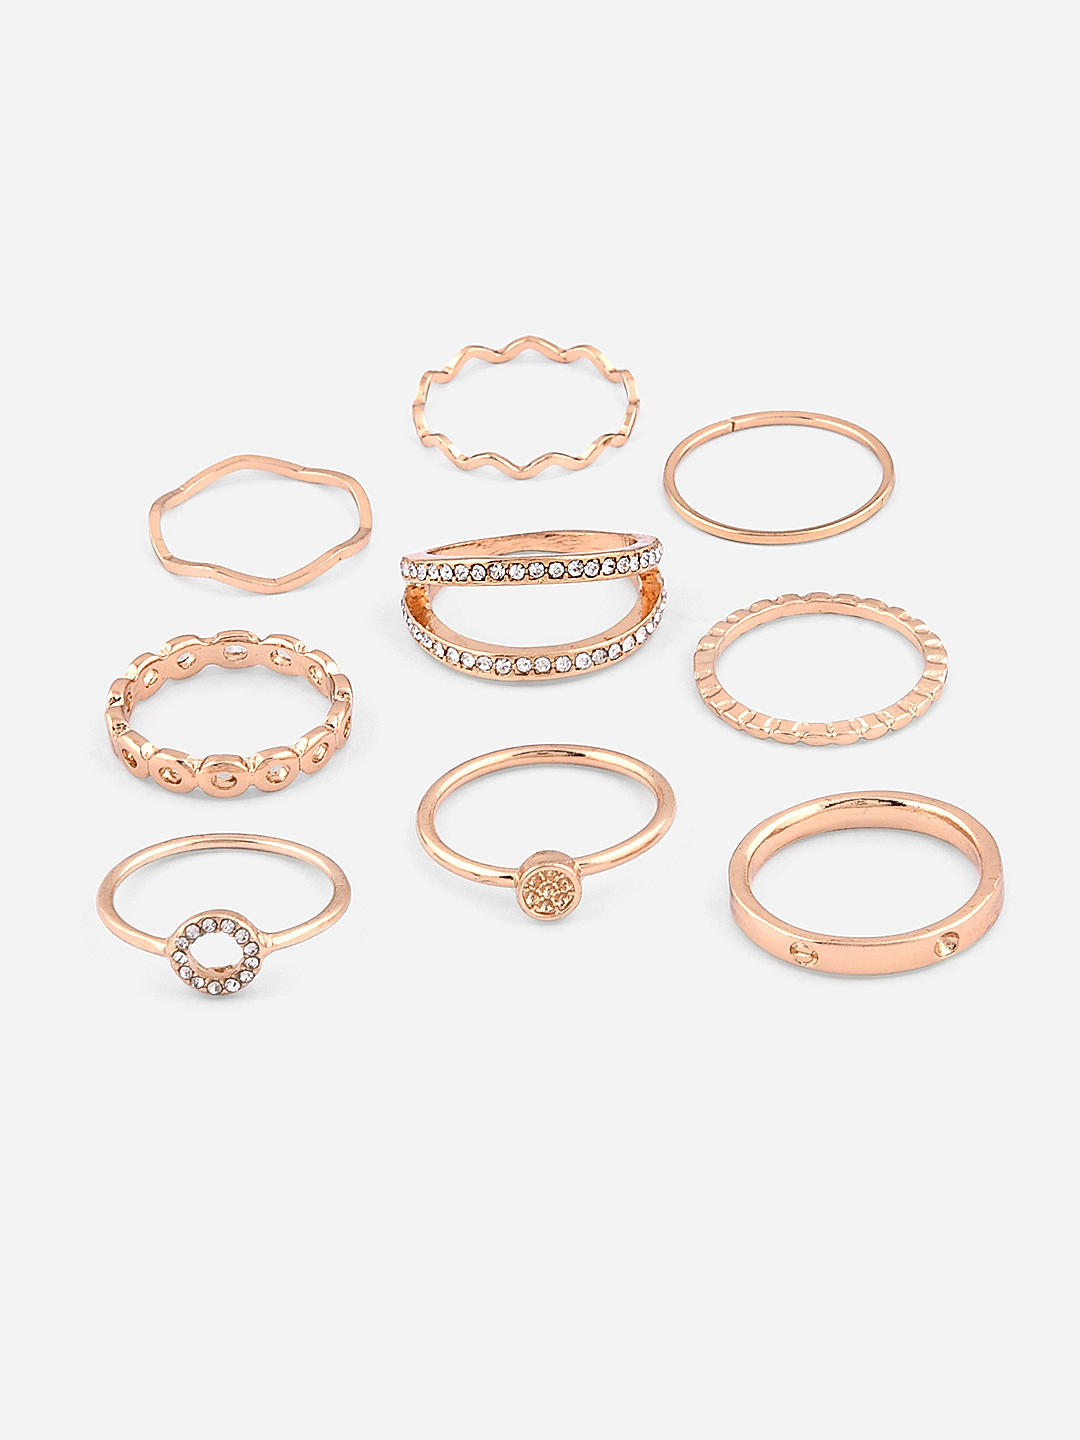 2pcs/Set Female Pink Stone Wedding Ring Sets for Women Rose Gold Filled  Square Zircon Stackable Joint Midi Ring | Wish